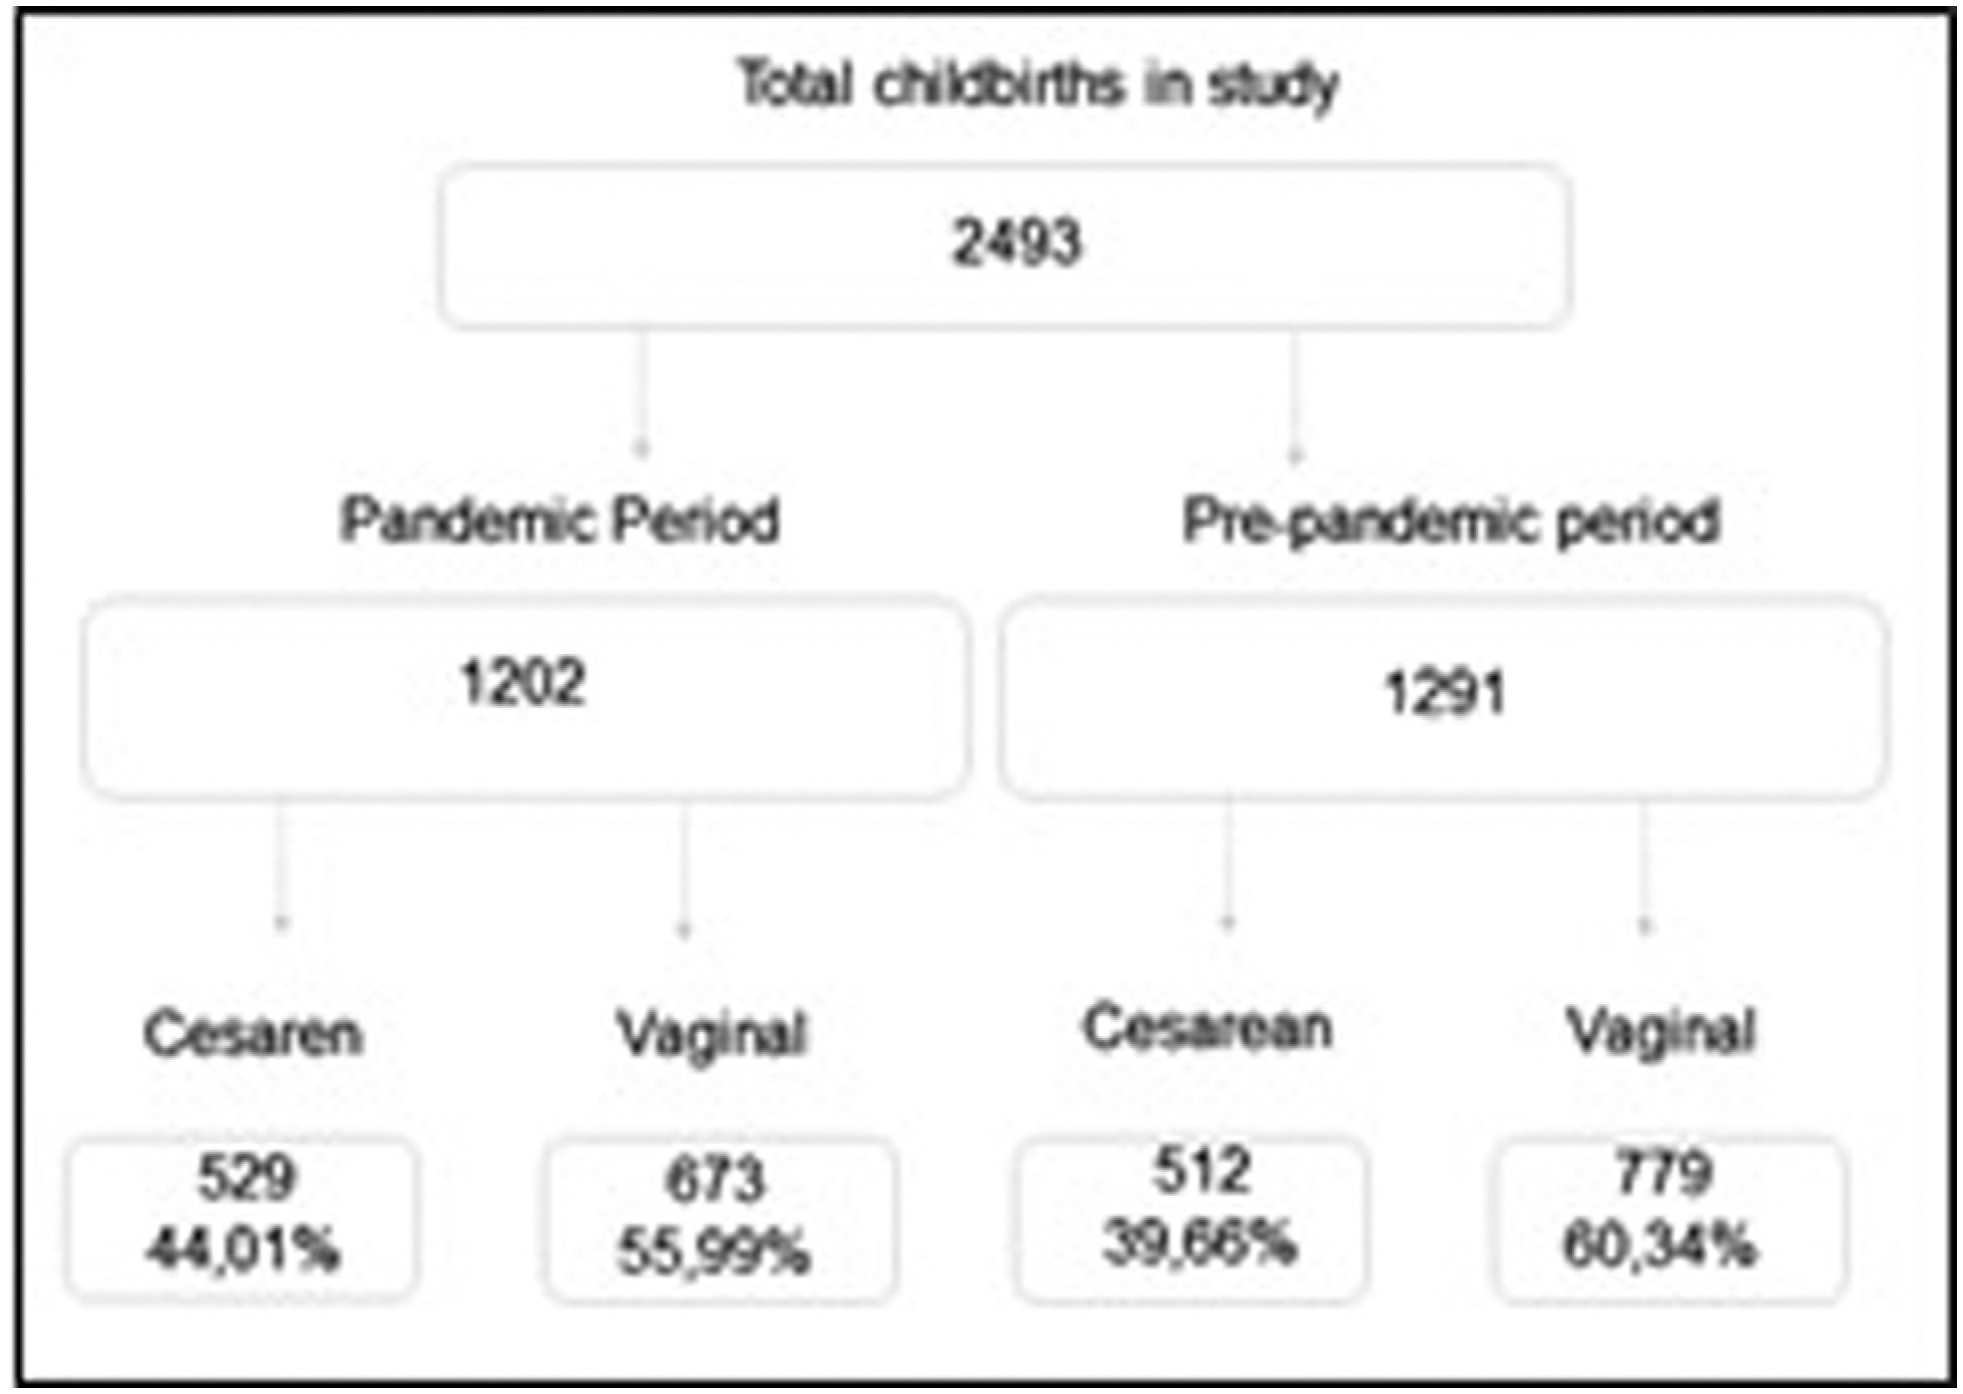 Increased Cesarean Section Rates during the COVID-19 Pandemic: Looking for Reasons through the Robson Ten Group Classification System